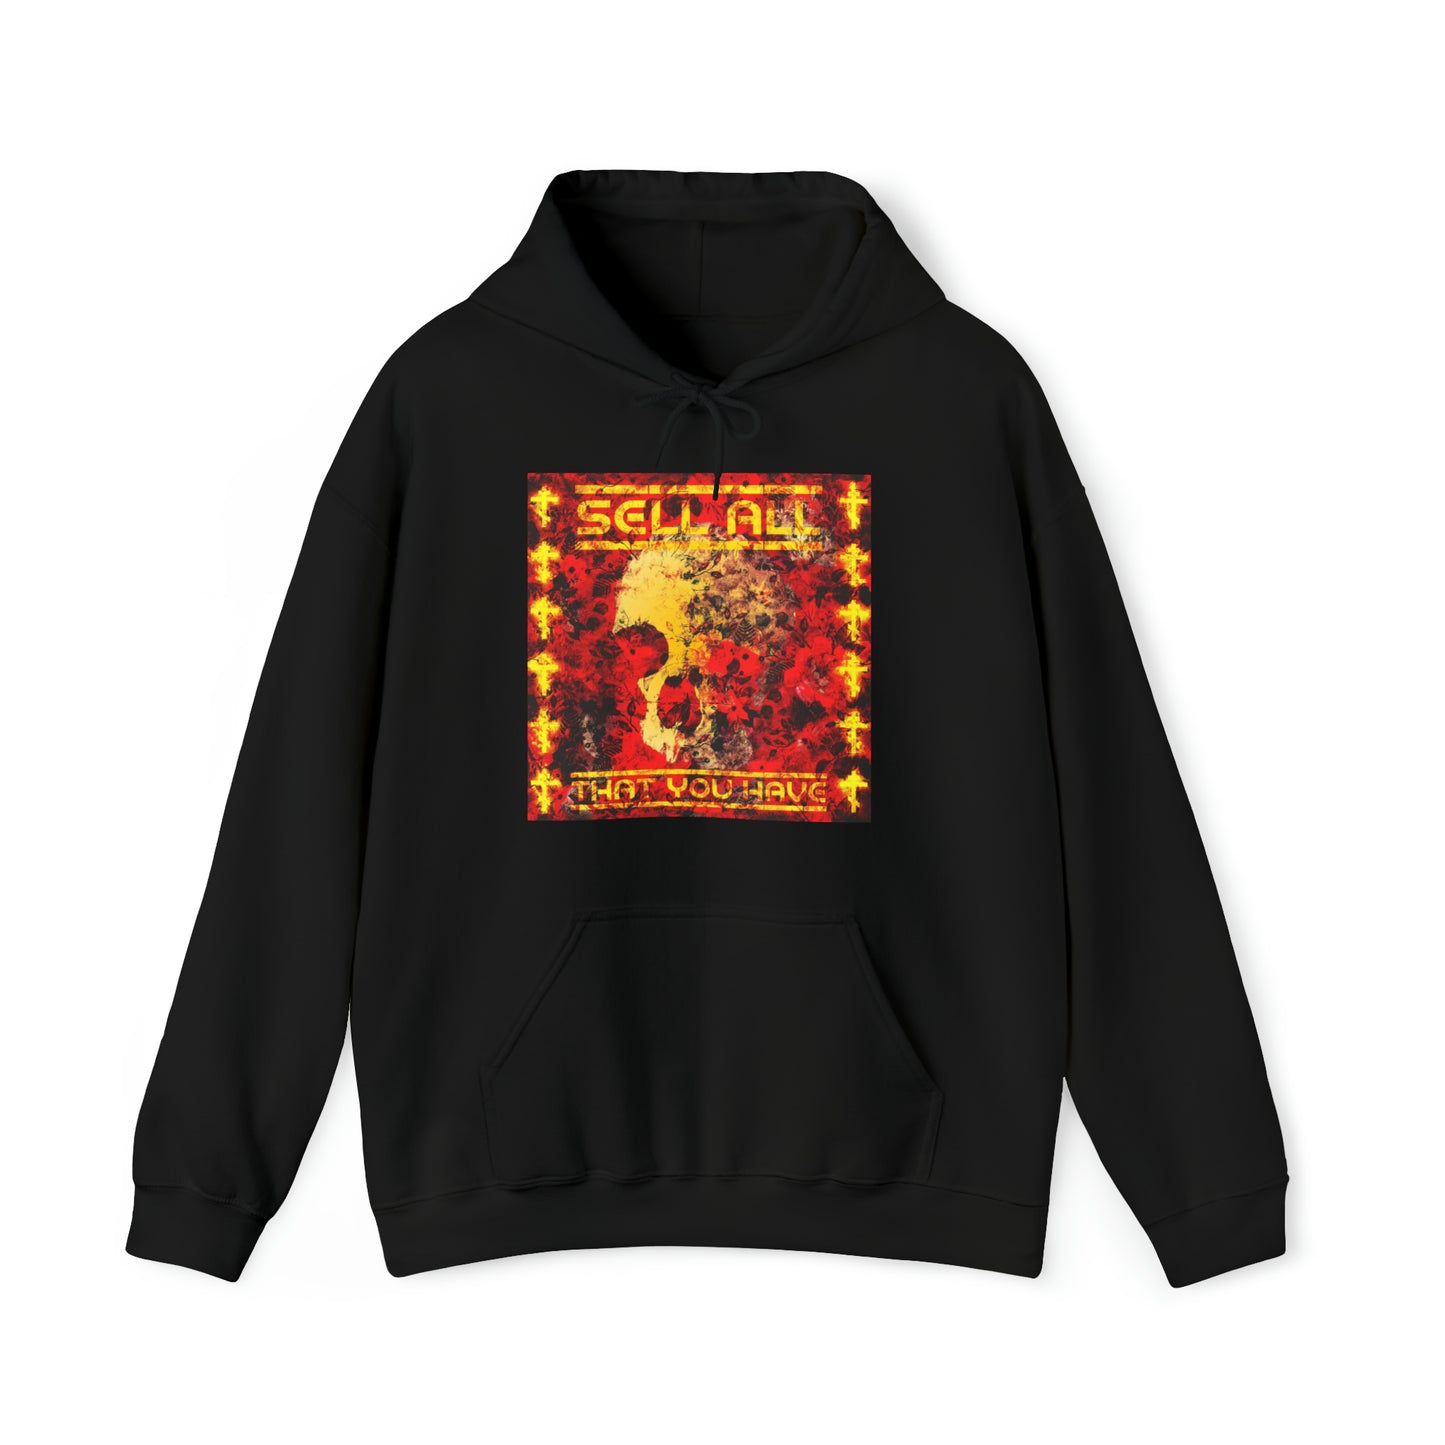 Sell All That You Have No. 1 | Orthodox Christian Hoodie / Hooded Sweatshirt